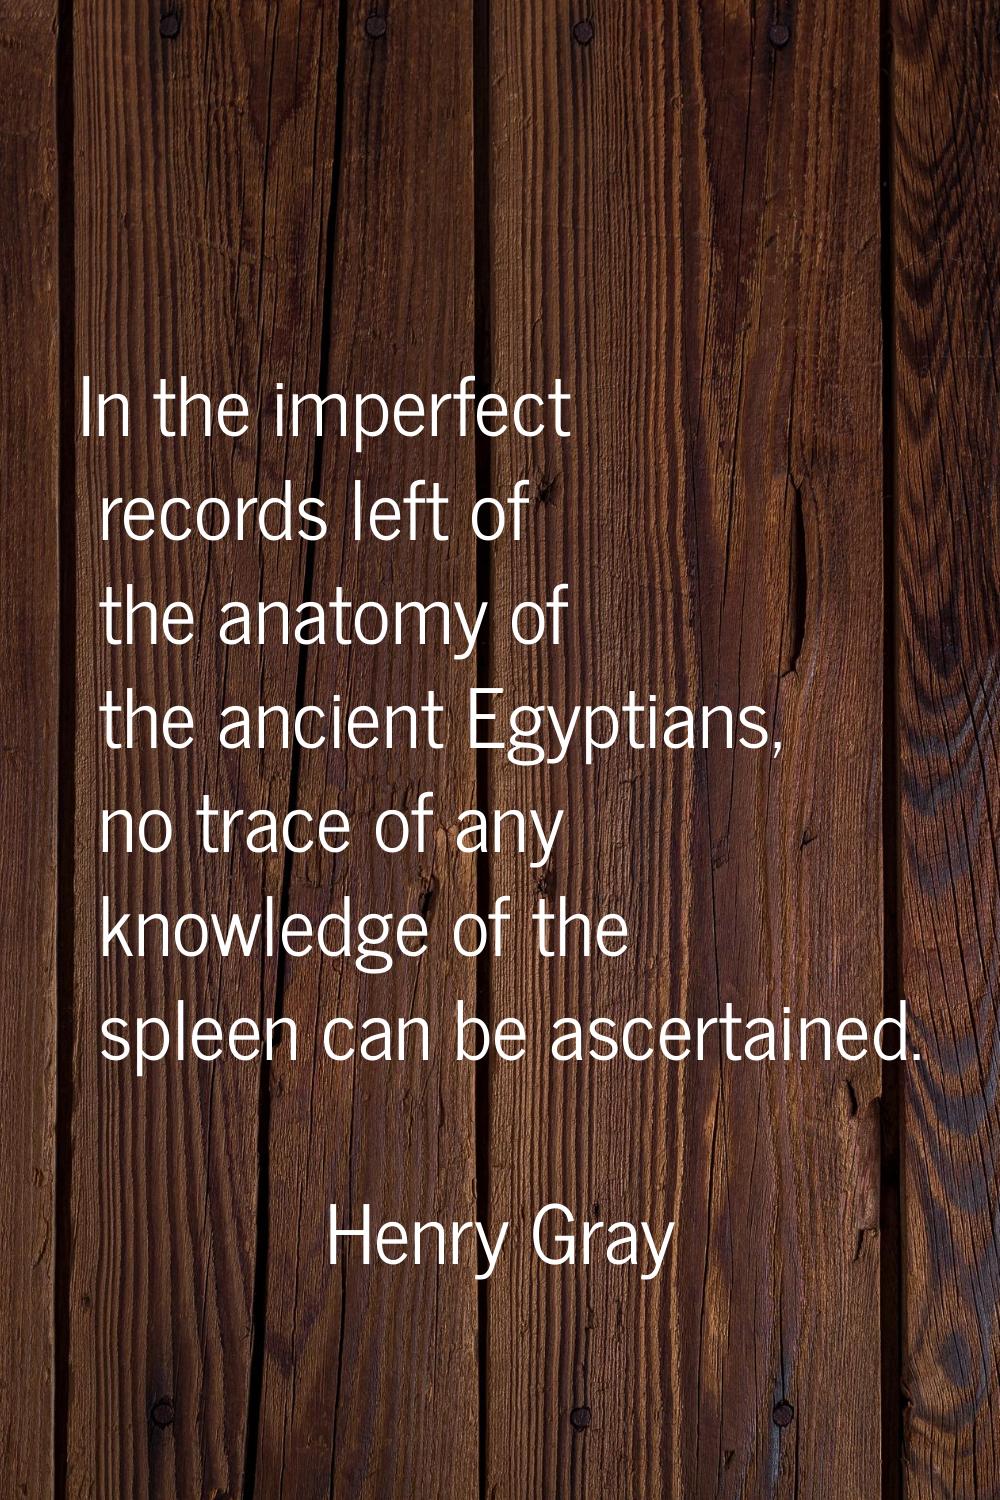 In the imperfect records left of the anatomy of the ancient Egyptians, no trace of any knowledge of